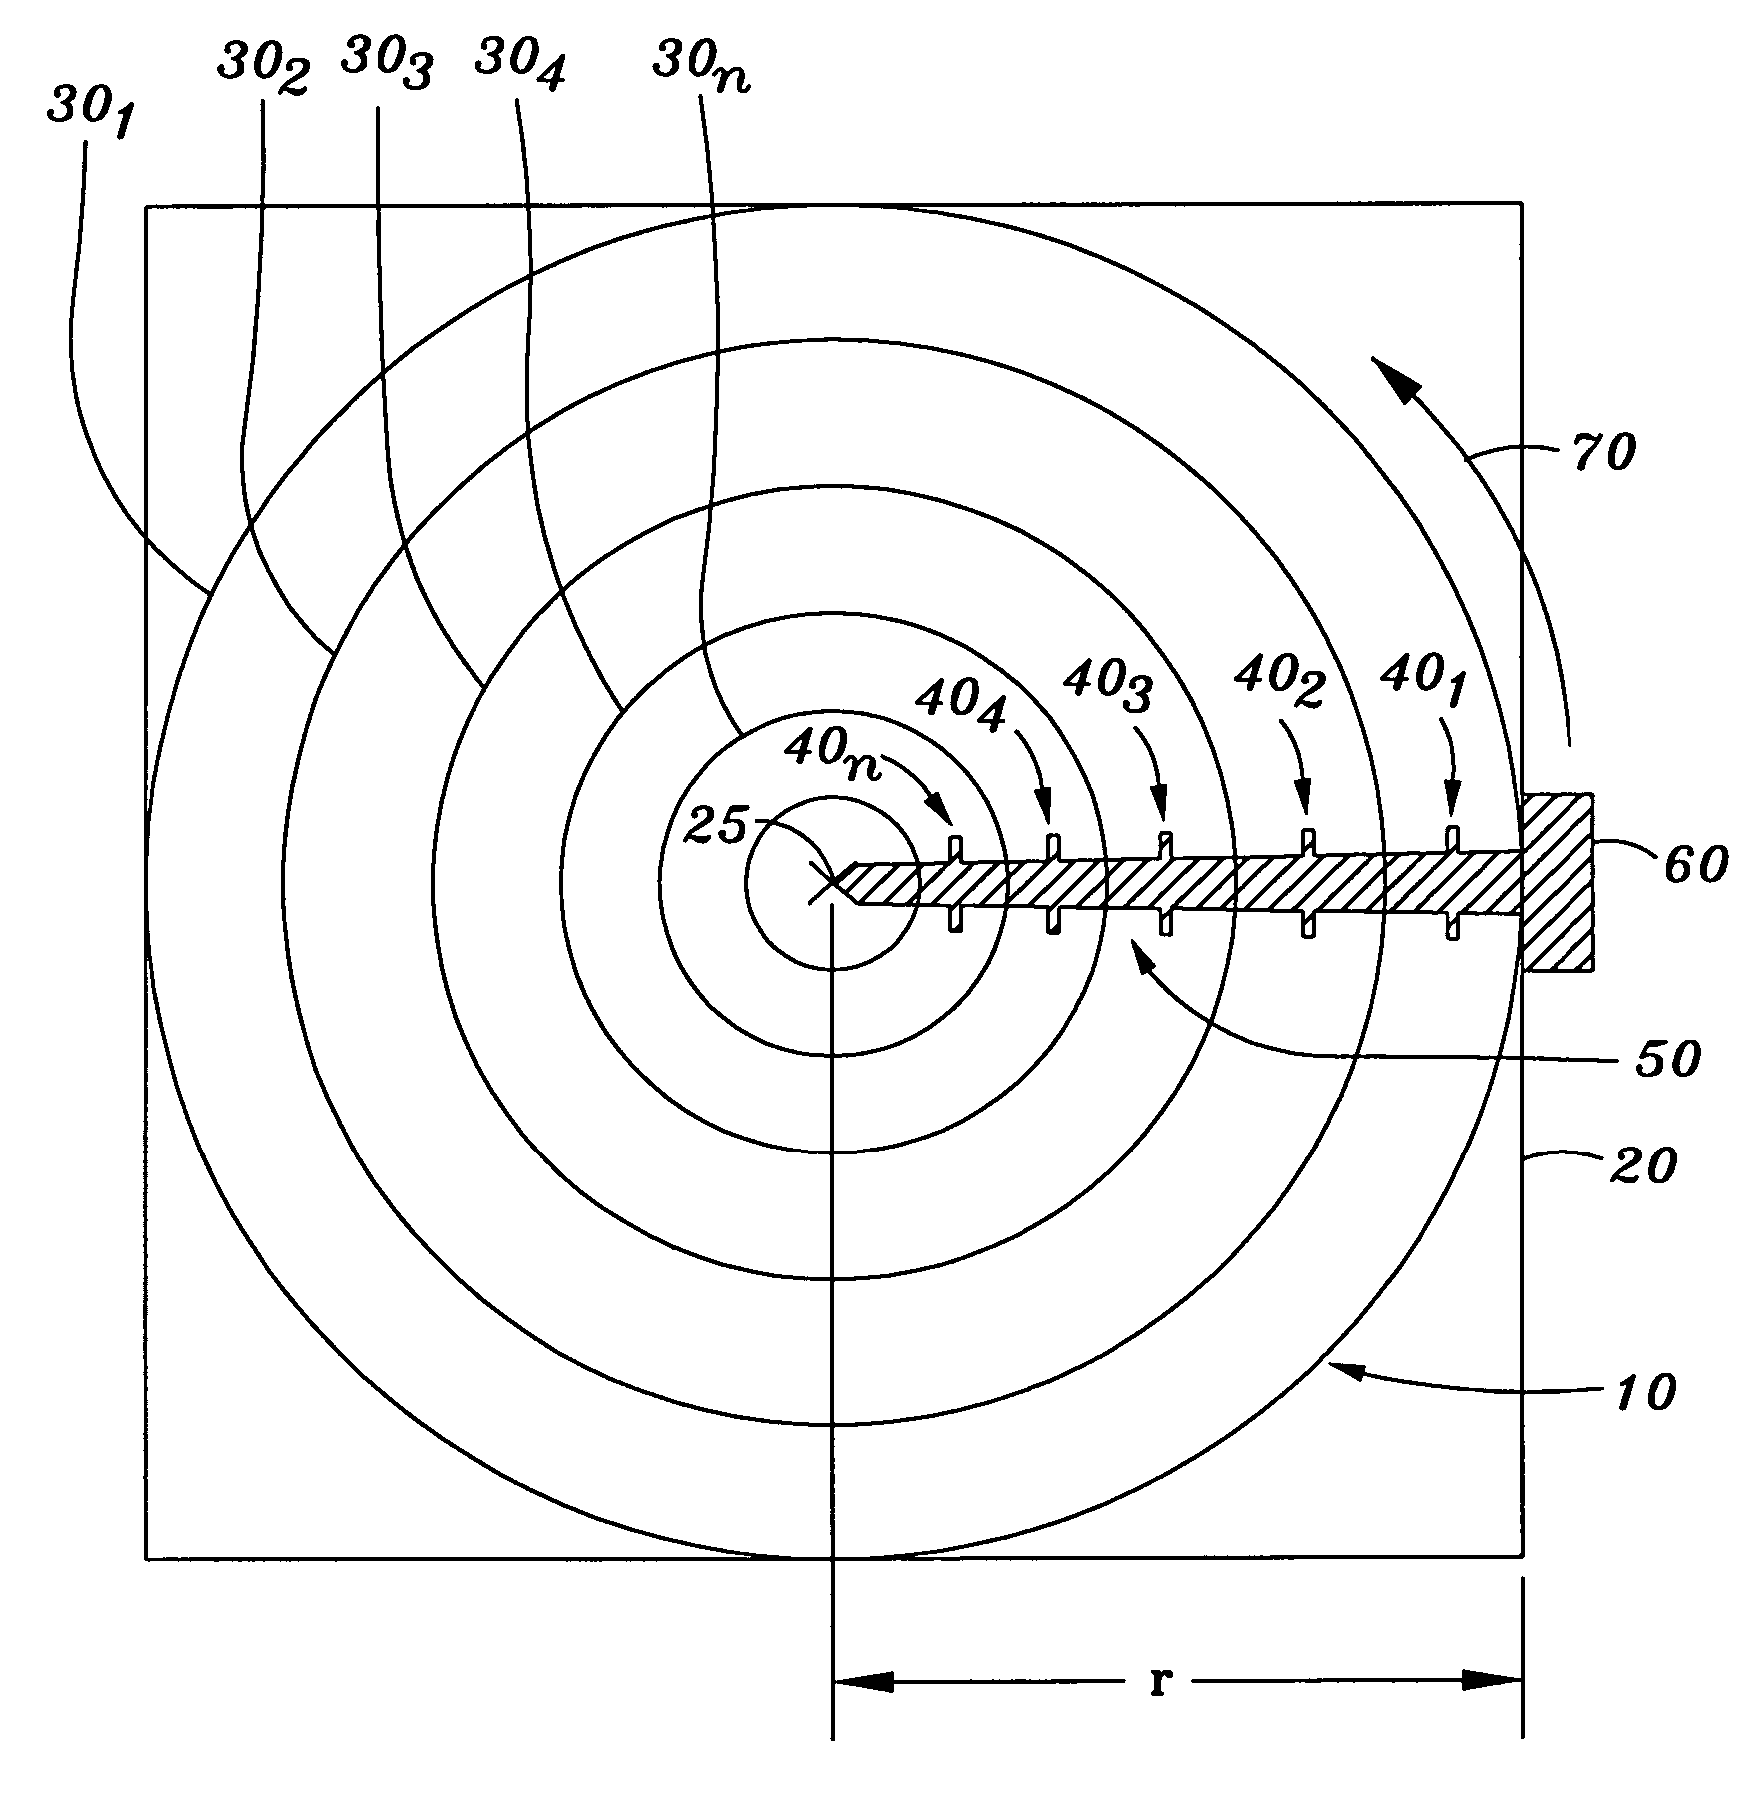 System and method for determining a pivot center and radius based on a least squares approach